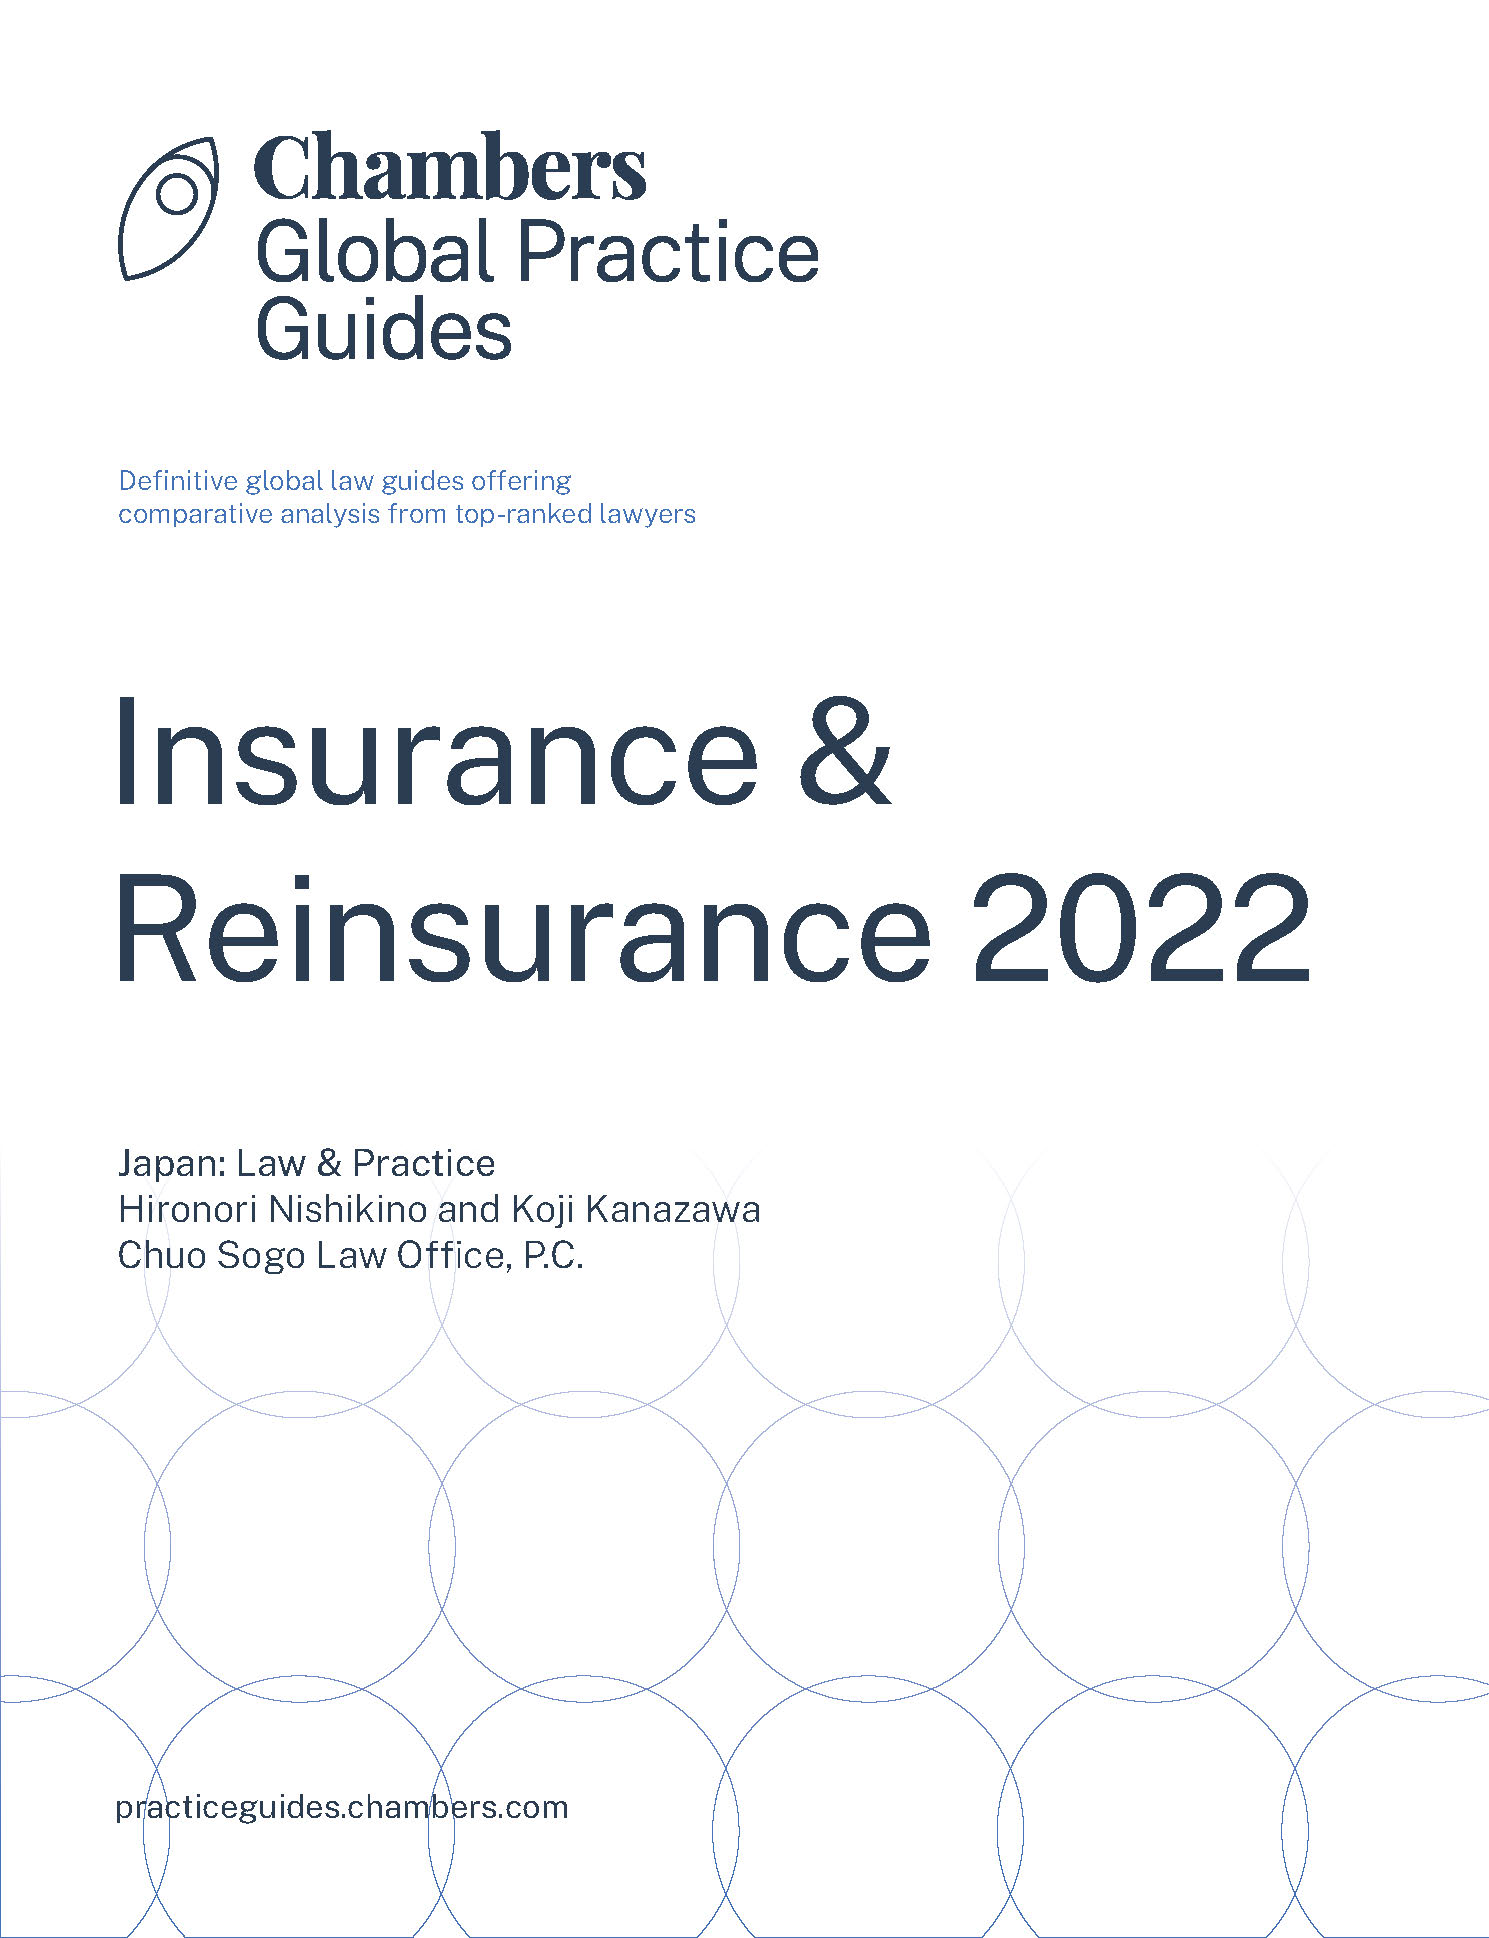 Chambers Global Practice Guides: Insurance & Reinsurance – Japan – Law and Practice 2022